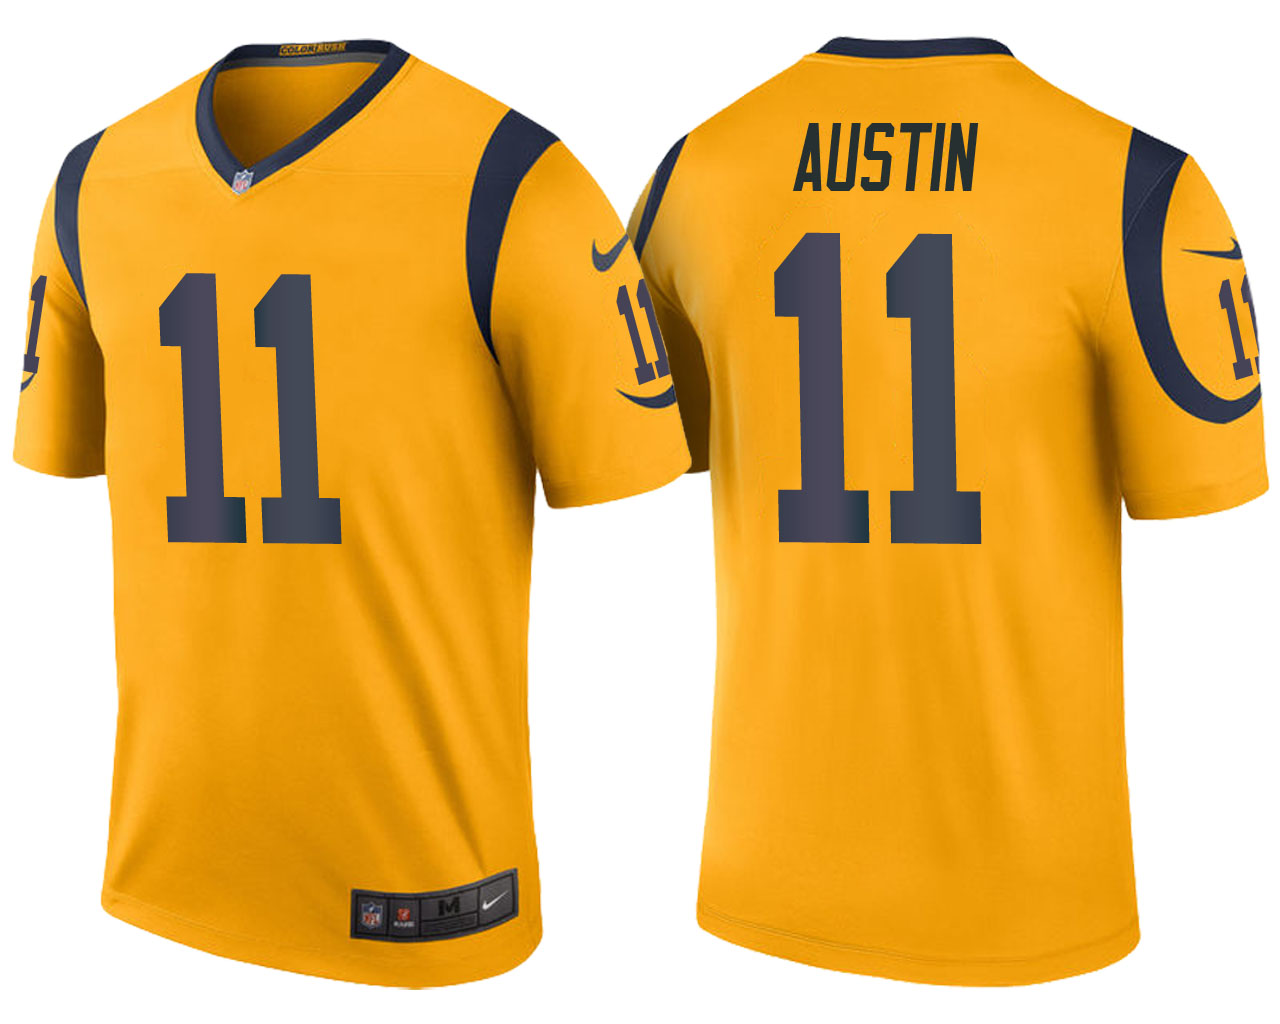 Tavon Austin Gold Color Rush Legend Jersey - Jared Goff Color Rush Jersey , HD Wallpaper & Backgrounds